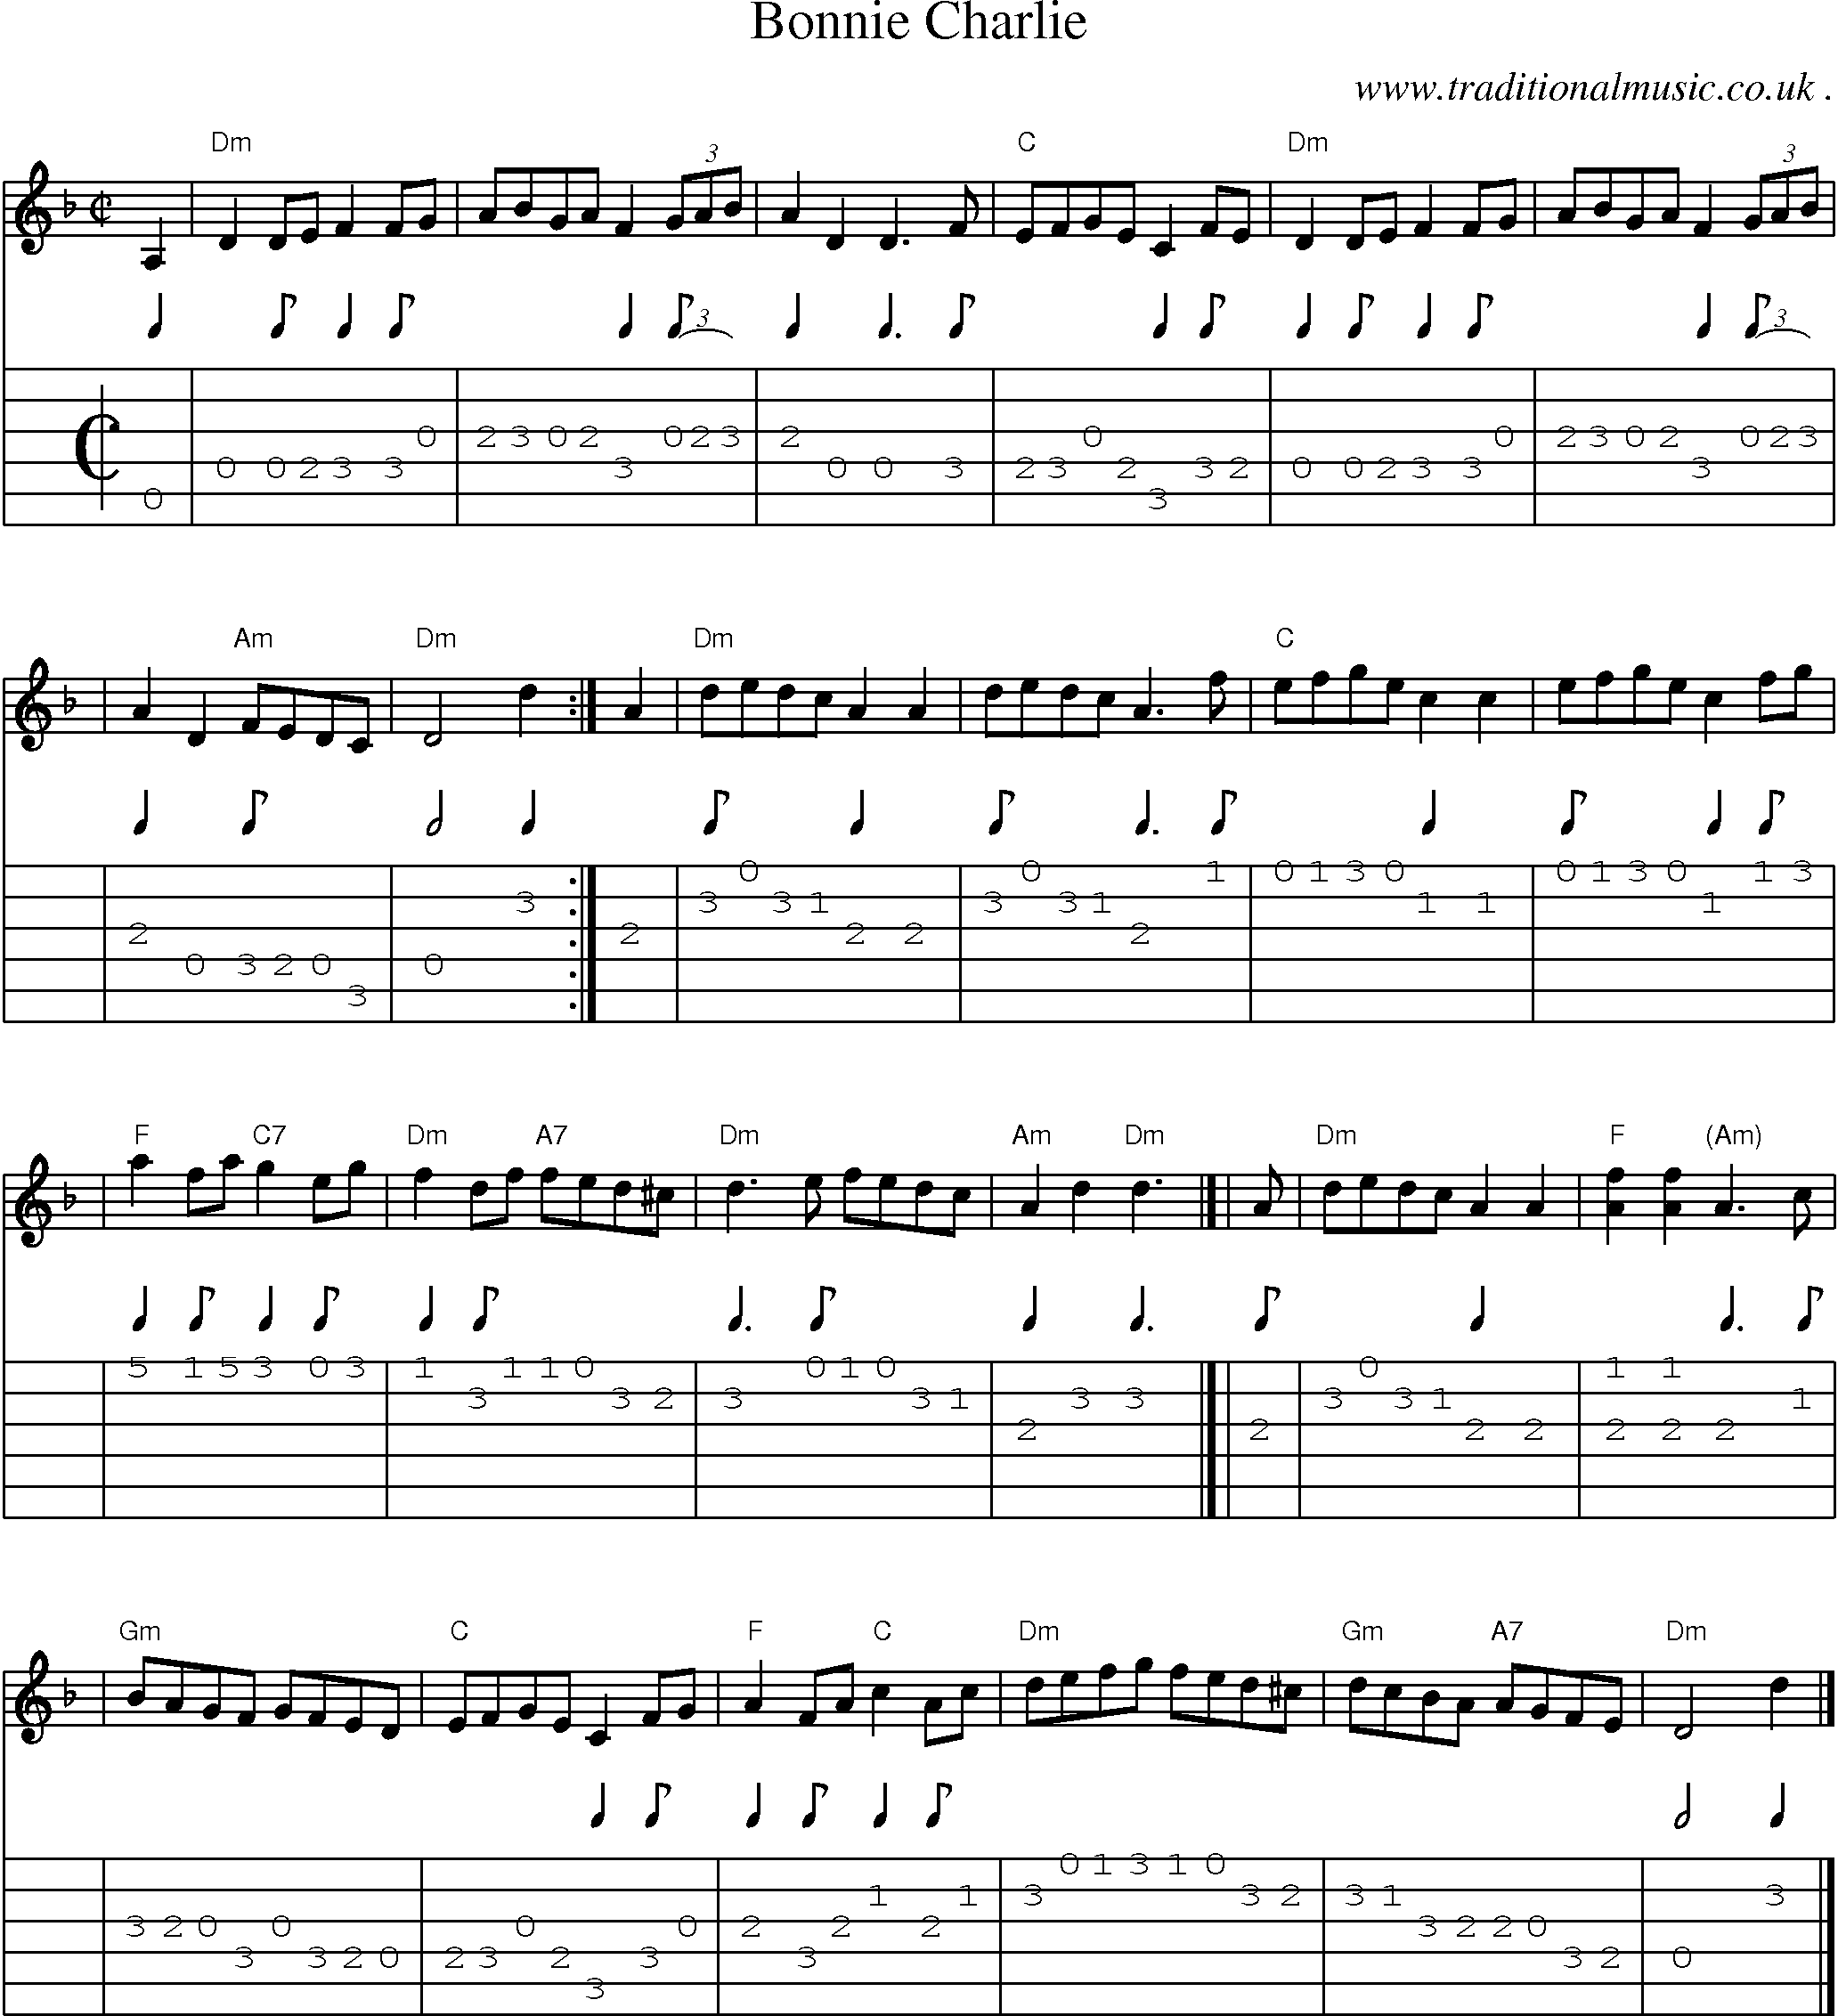 Sheet-music  score, Chords and Guitar Tabs for Bonnie Charlie